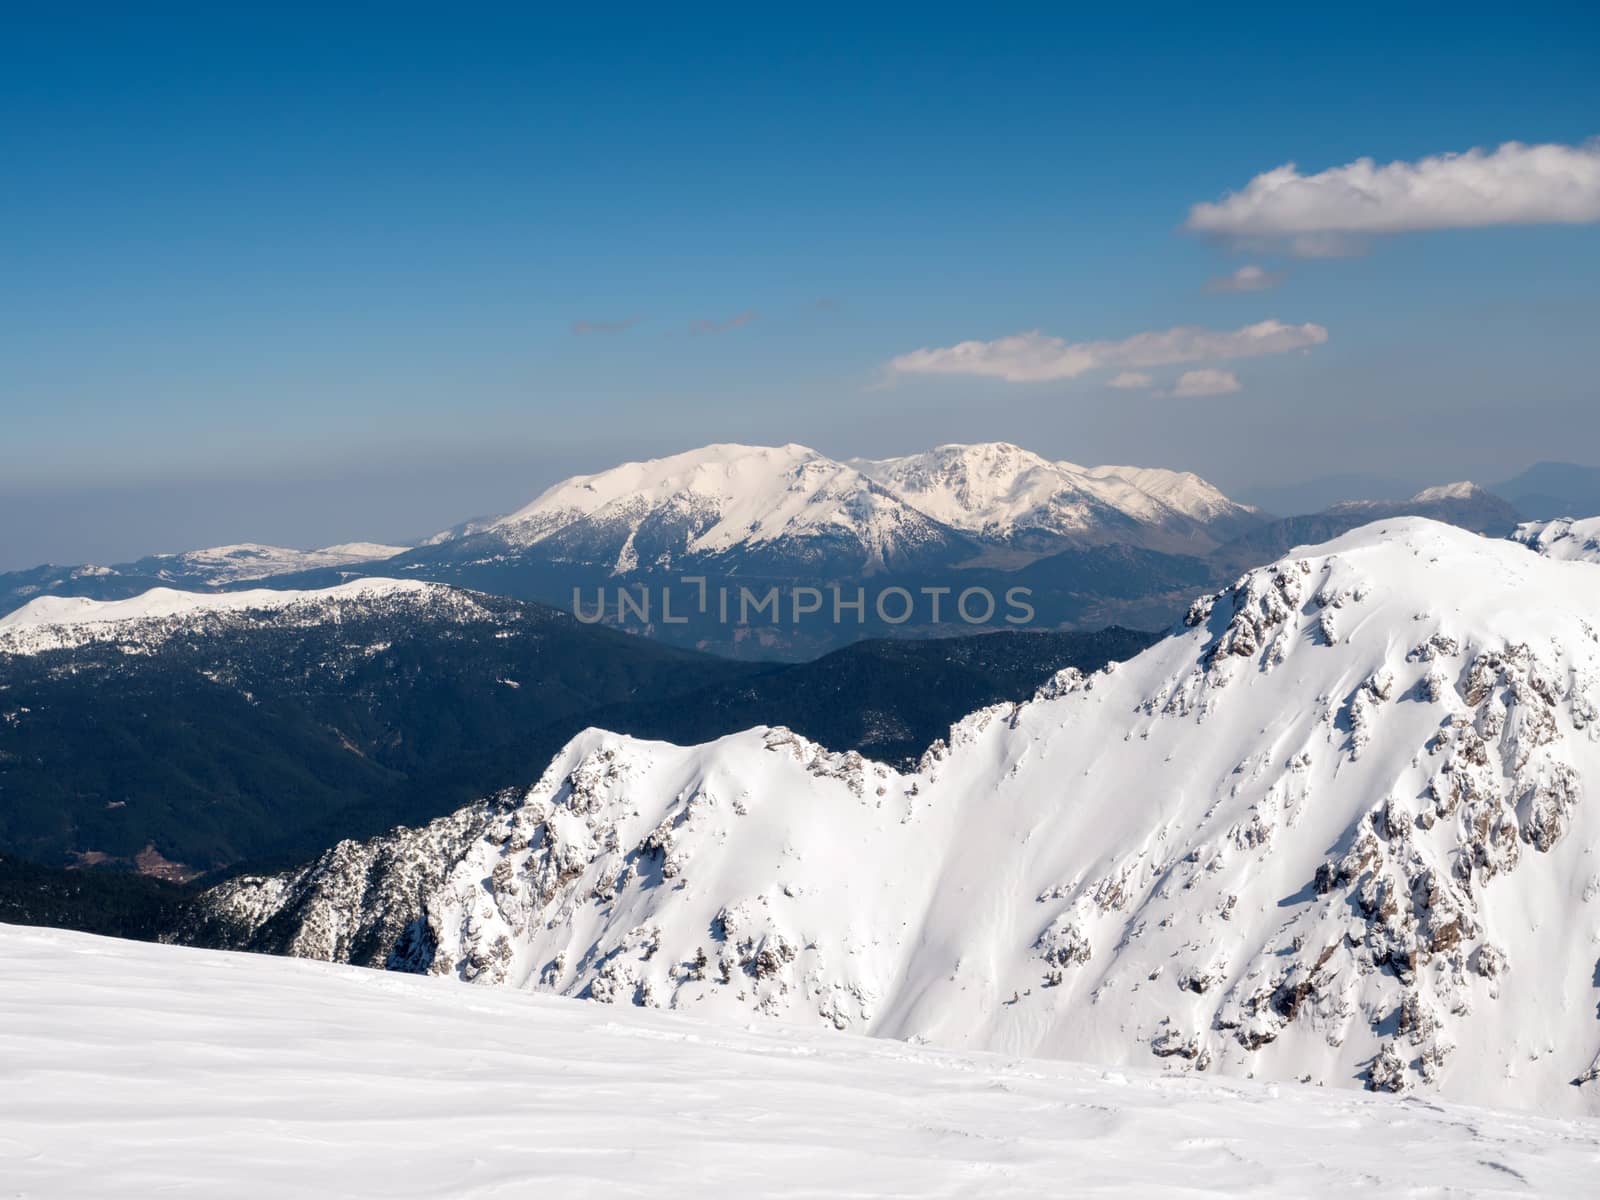 The top of the mountain Helmos in Kalavrita ski resort with snow and clouds in a sunny day